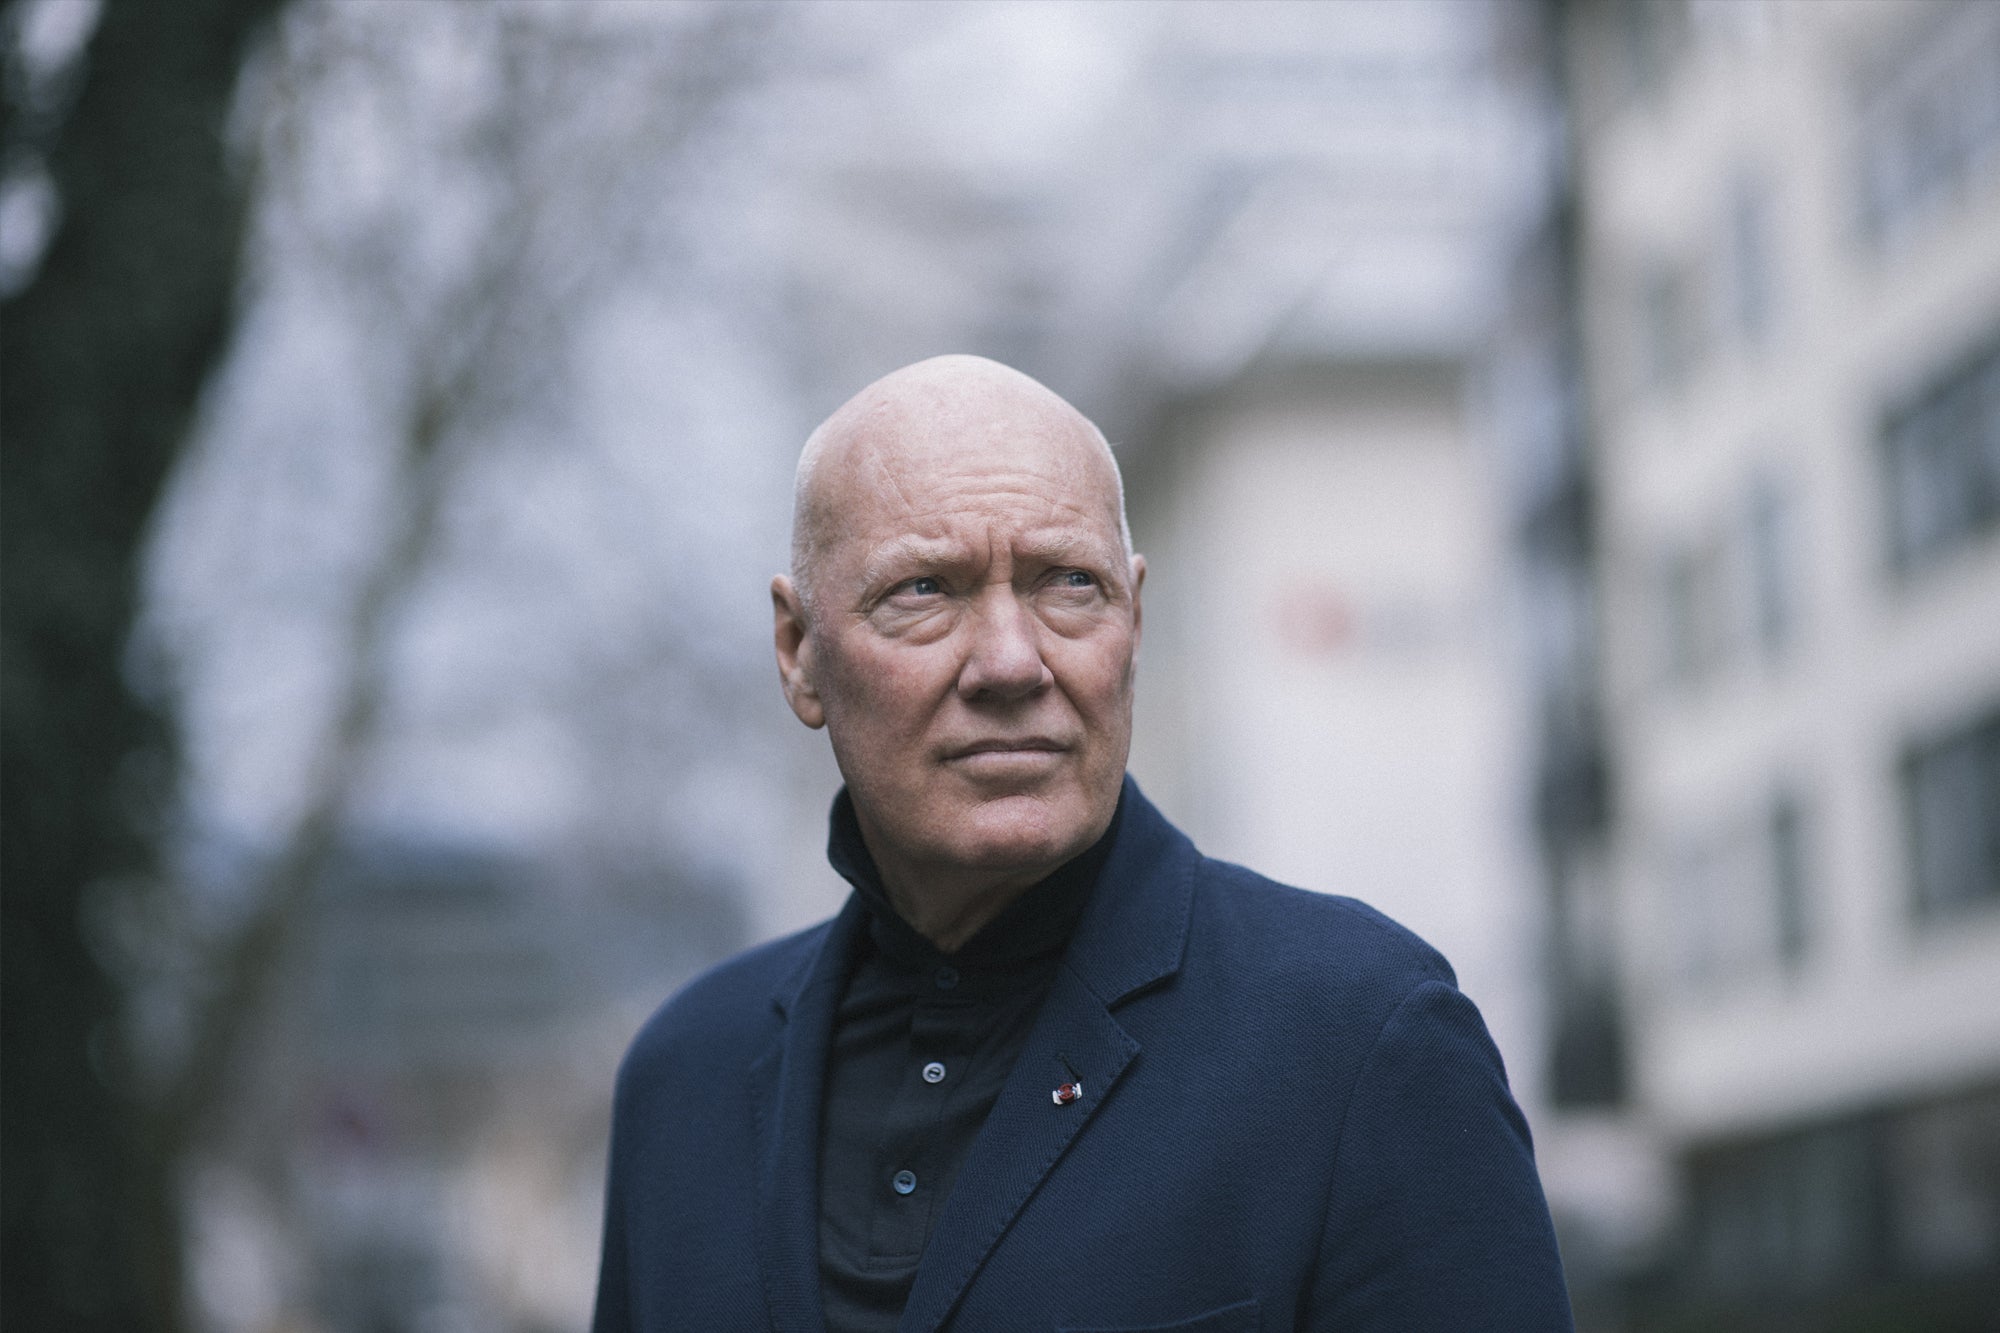 In Conversation with Jean-Claude Biver 